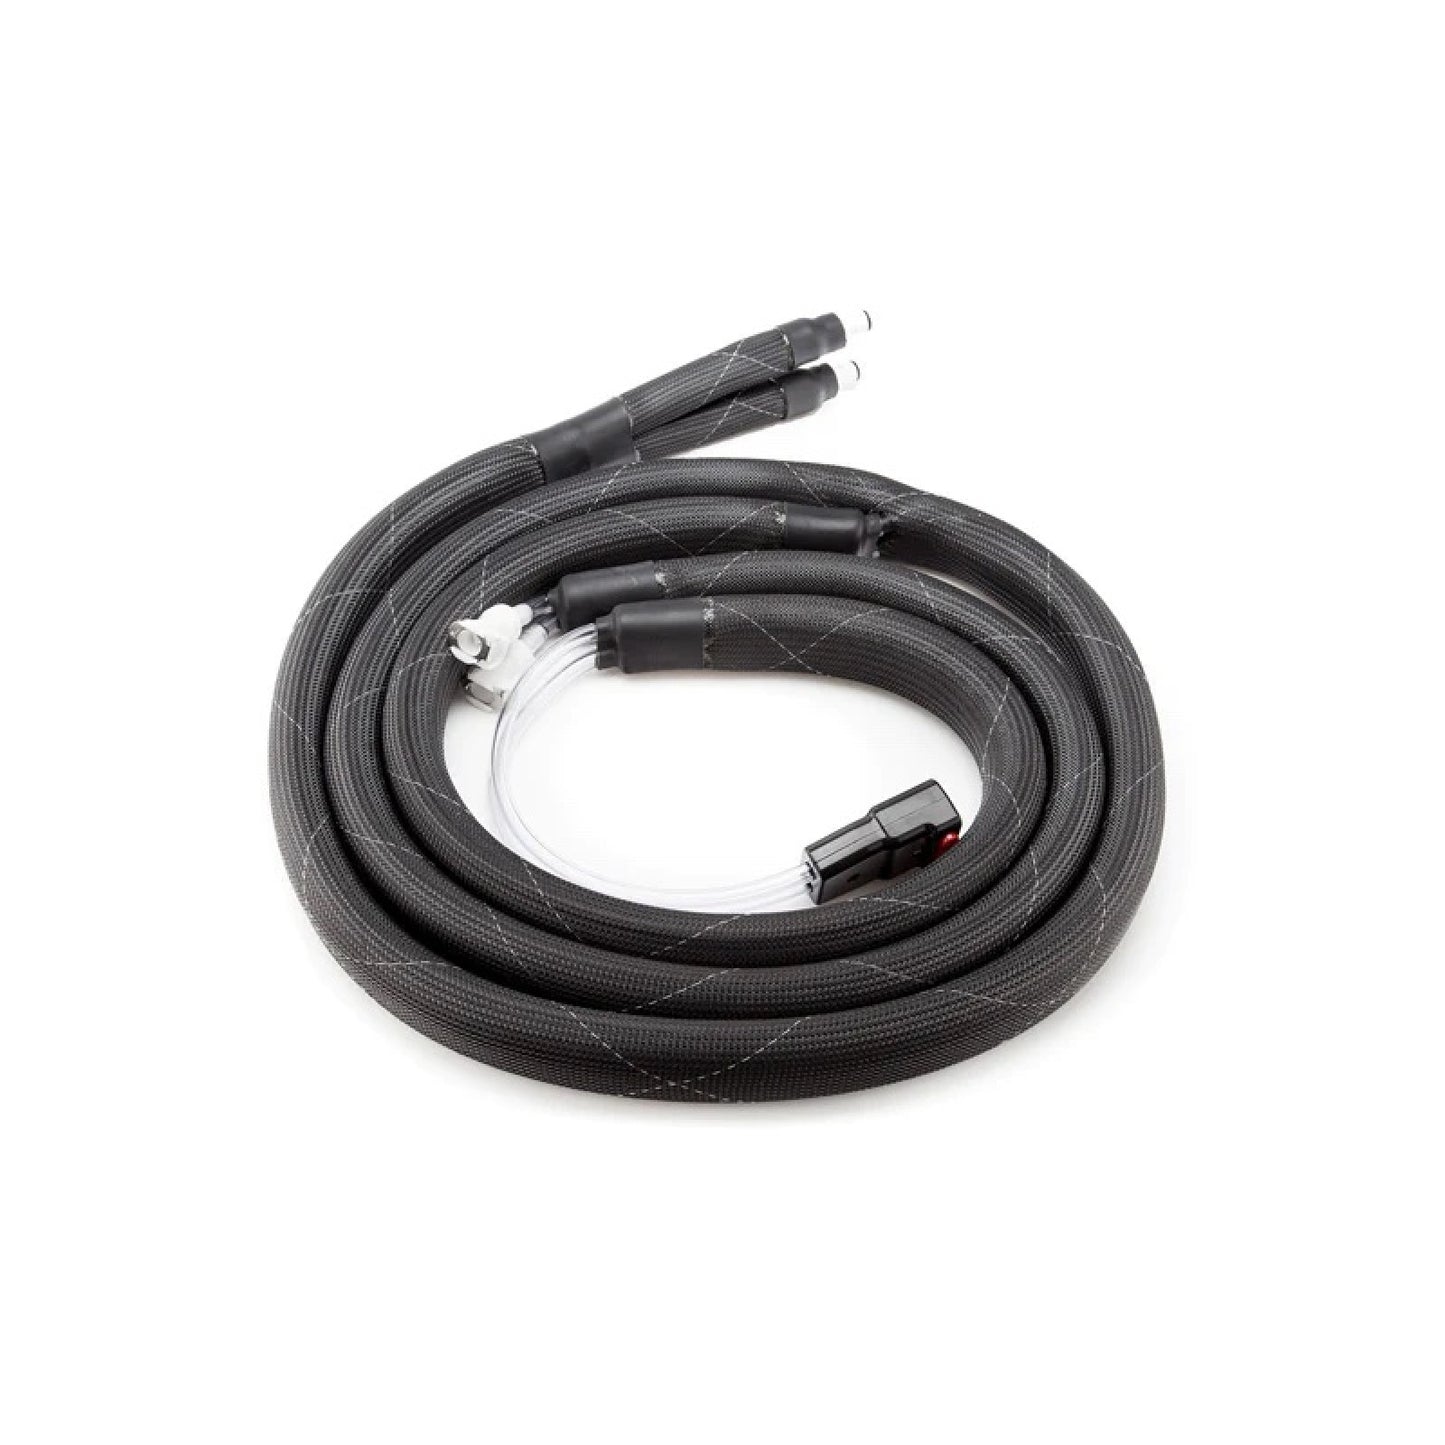 Roux Cool-X hose assembly for CoolShirt and FAST systems RXCH01-15